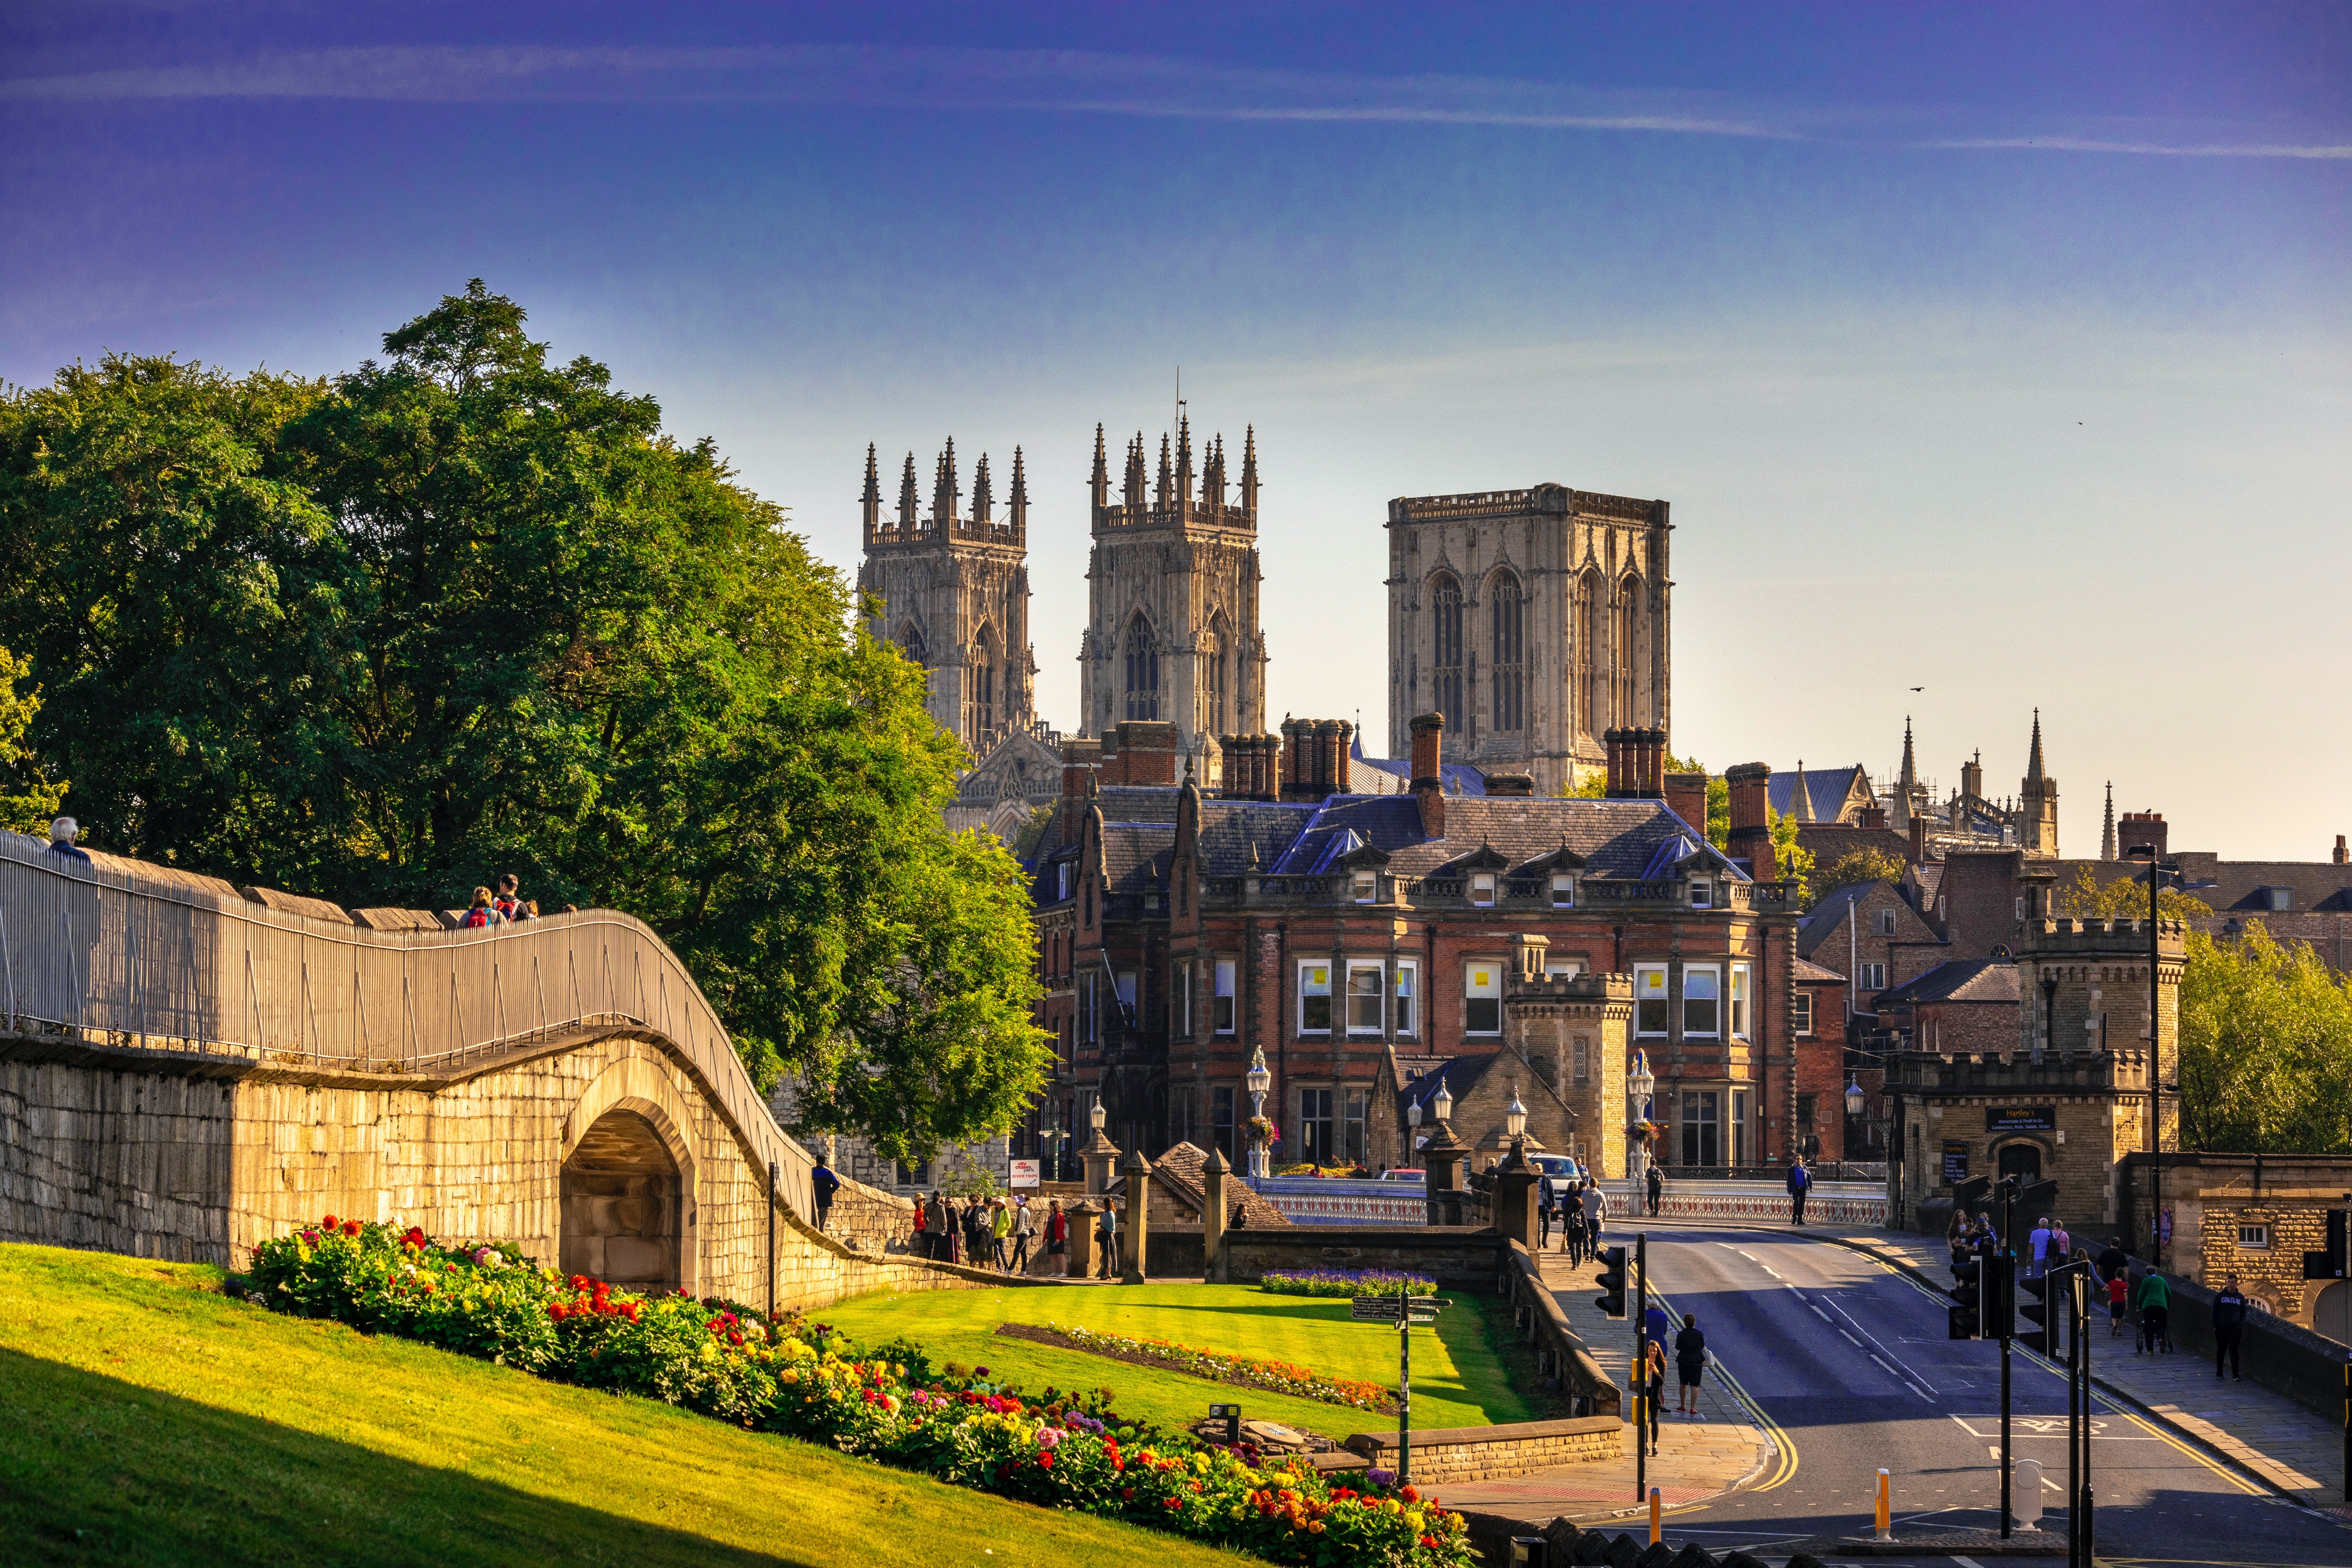 A street in York with an old bridge over the road flanked by green embankments. York Minster catherdral is in the background.